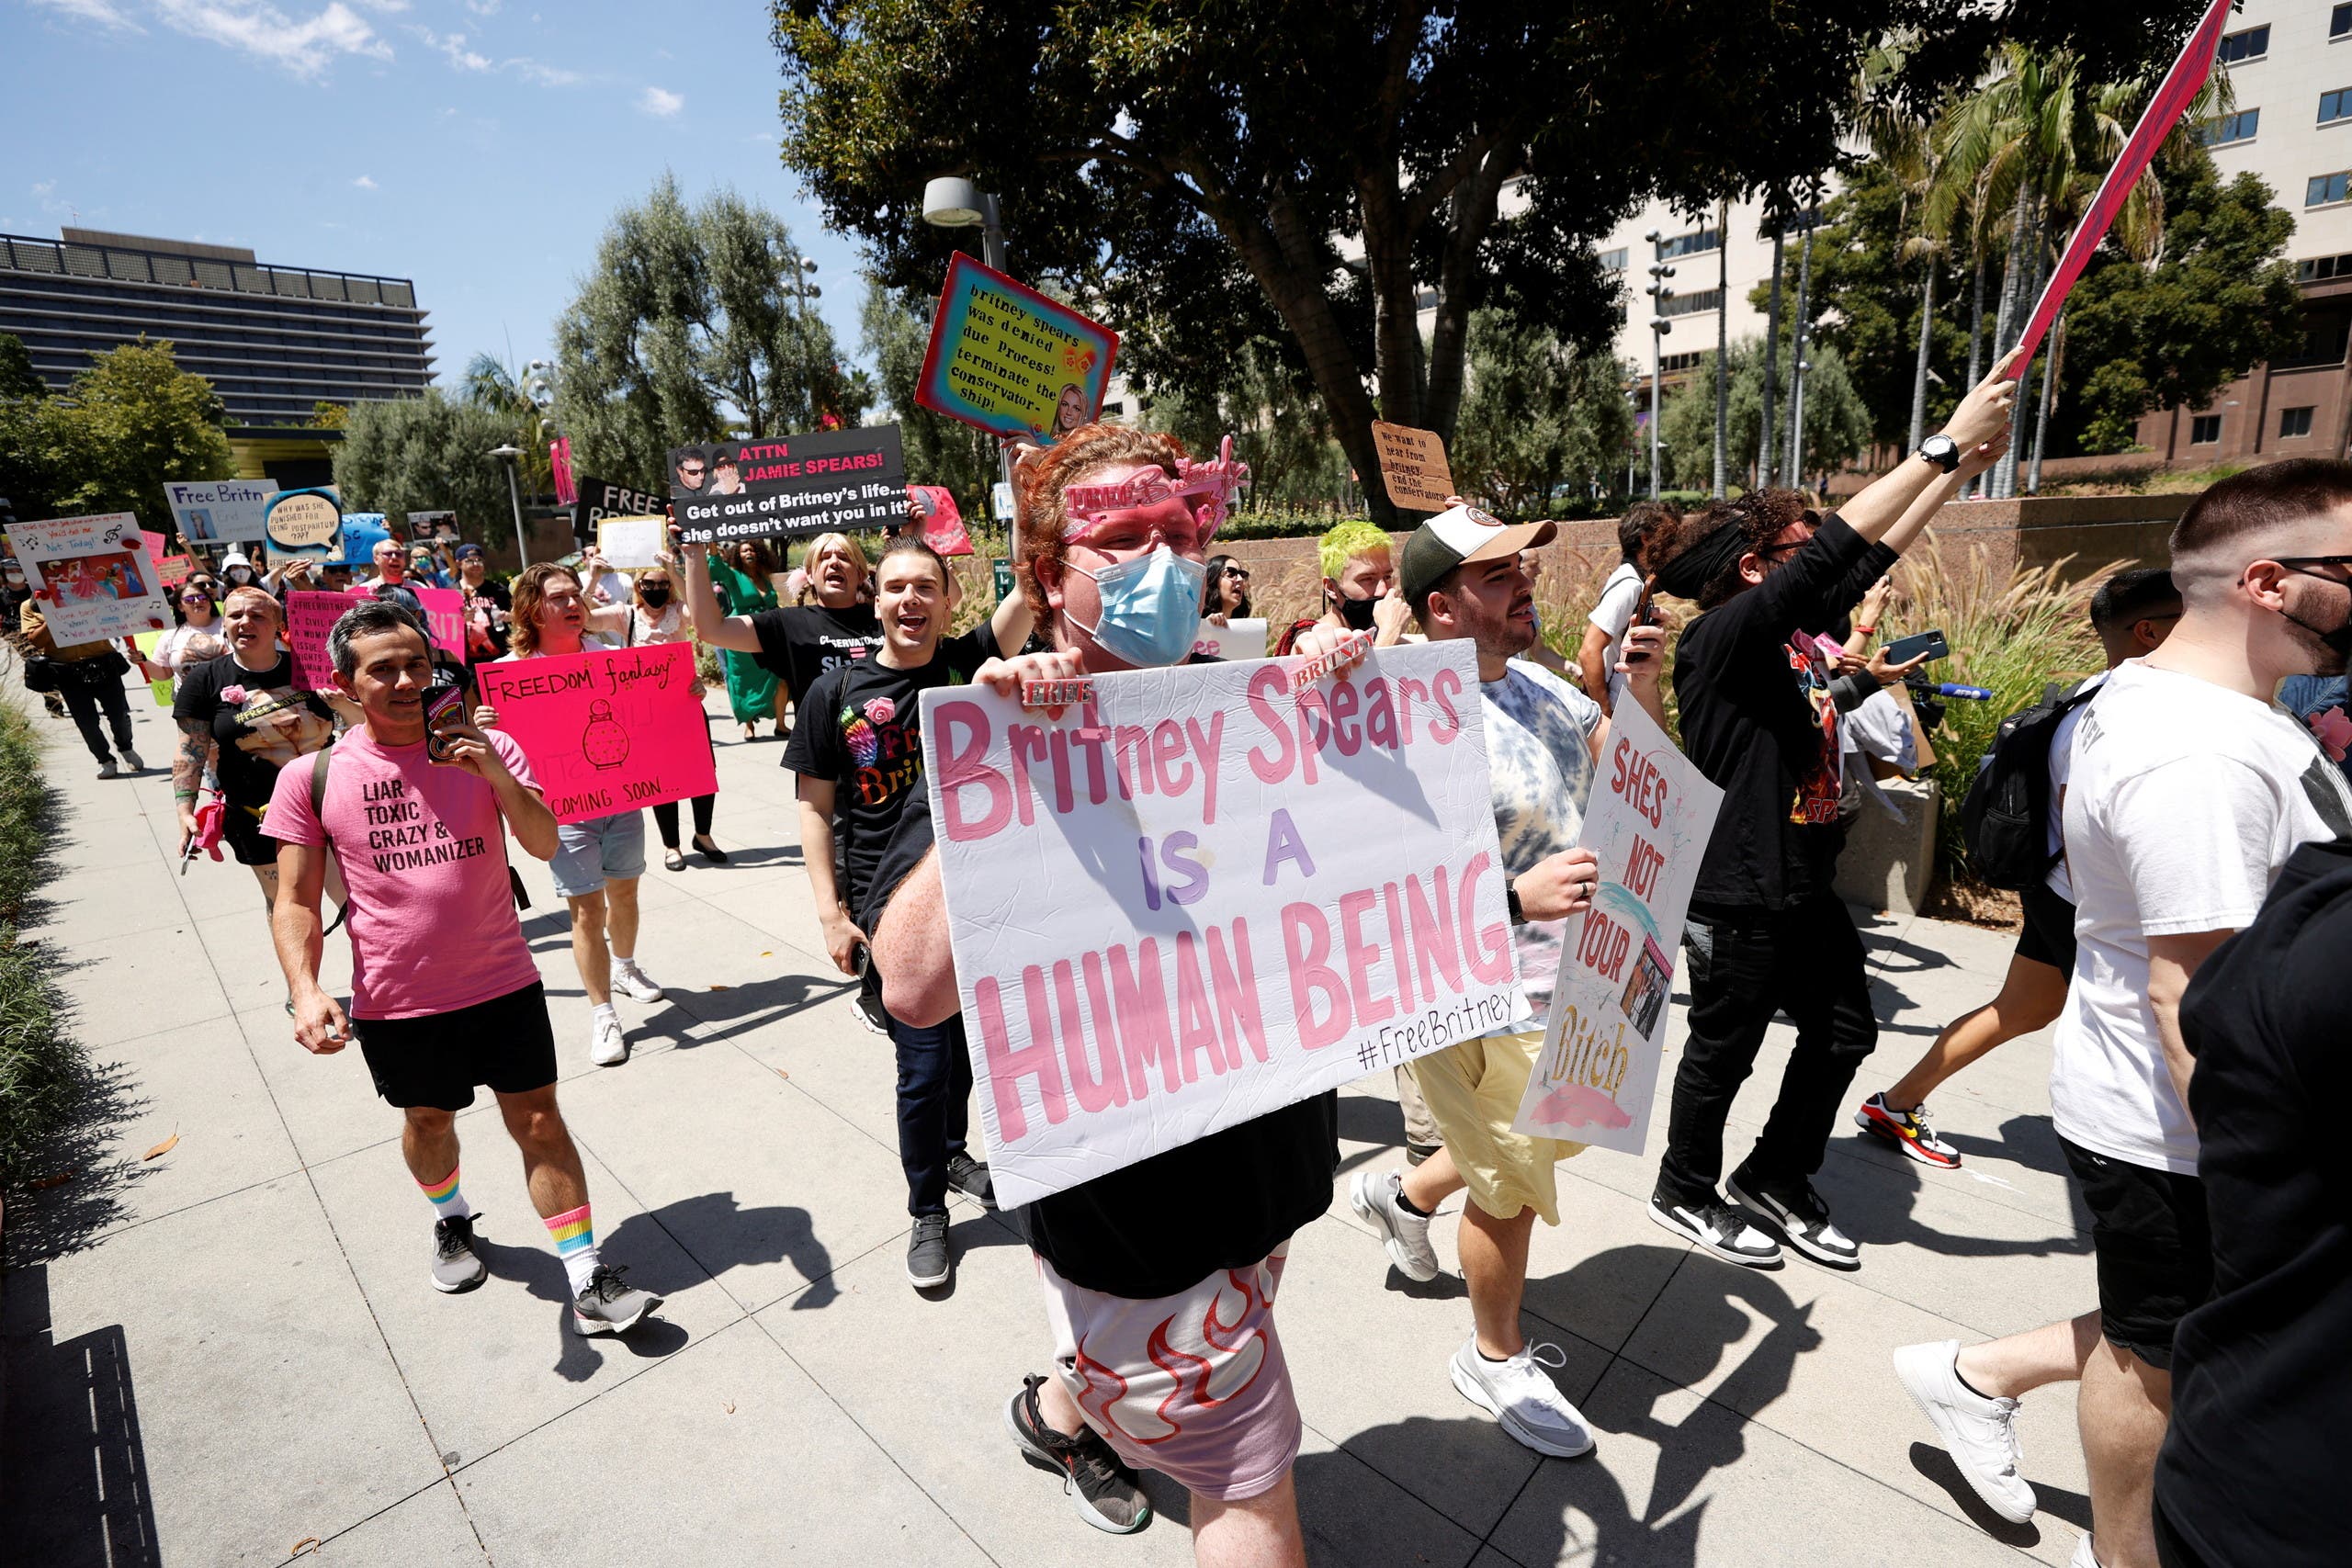 People protest in support of pop star Britney Spears on the day of a conservatorship case hearing at Stanley Mosk Courthouse in Los Angeles, California, US June 23, 2021. (Reuters)